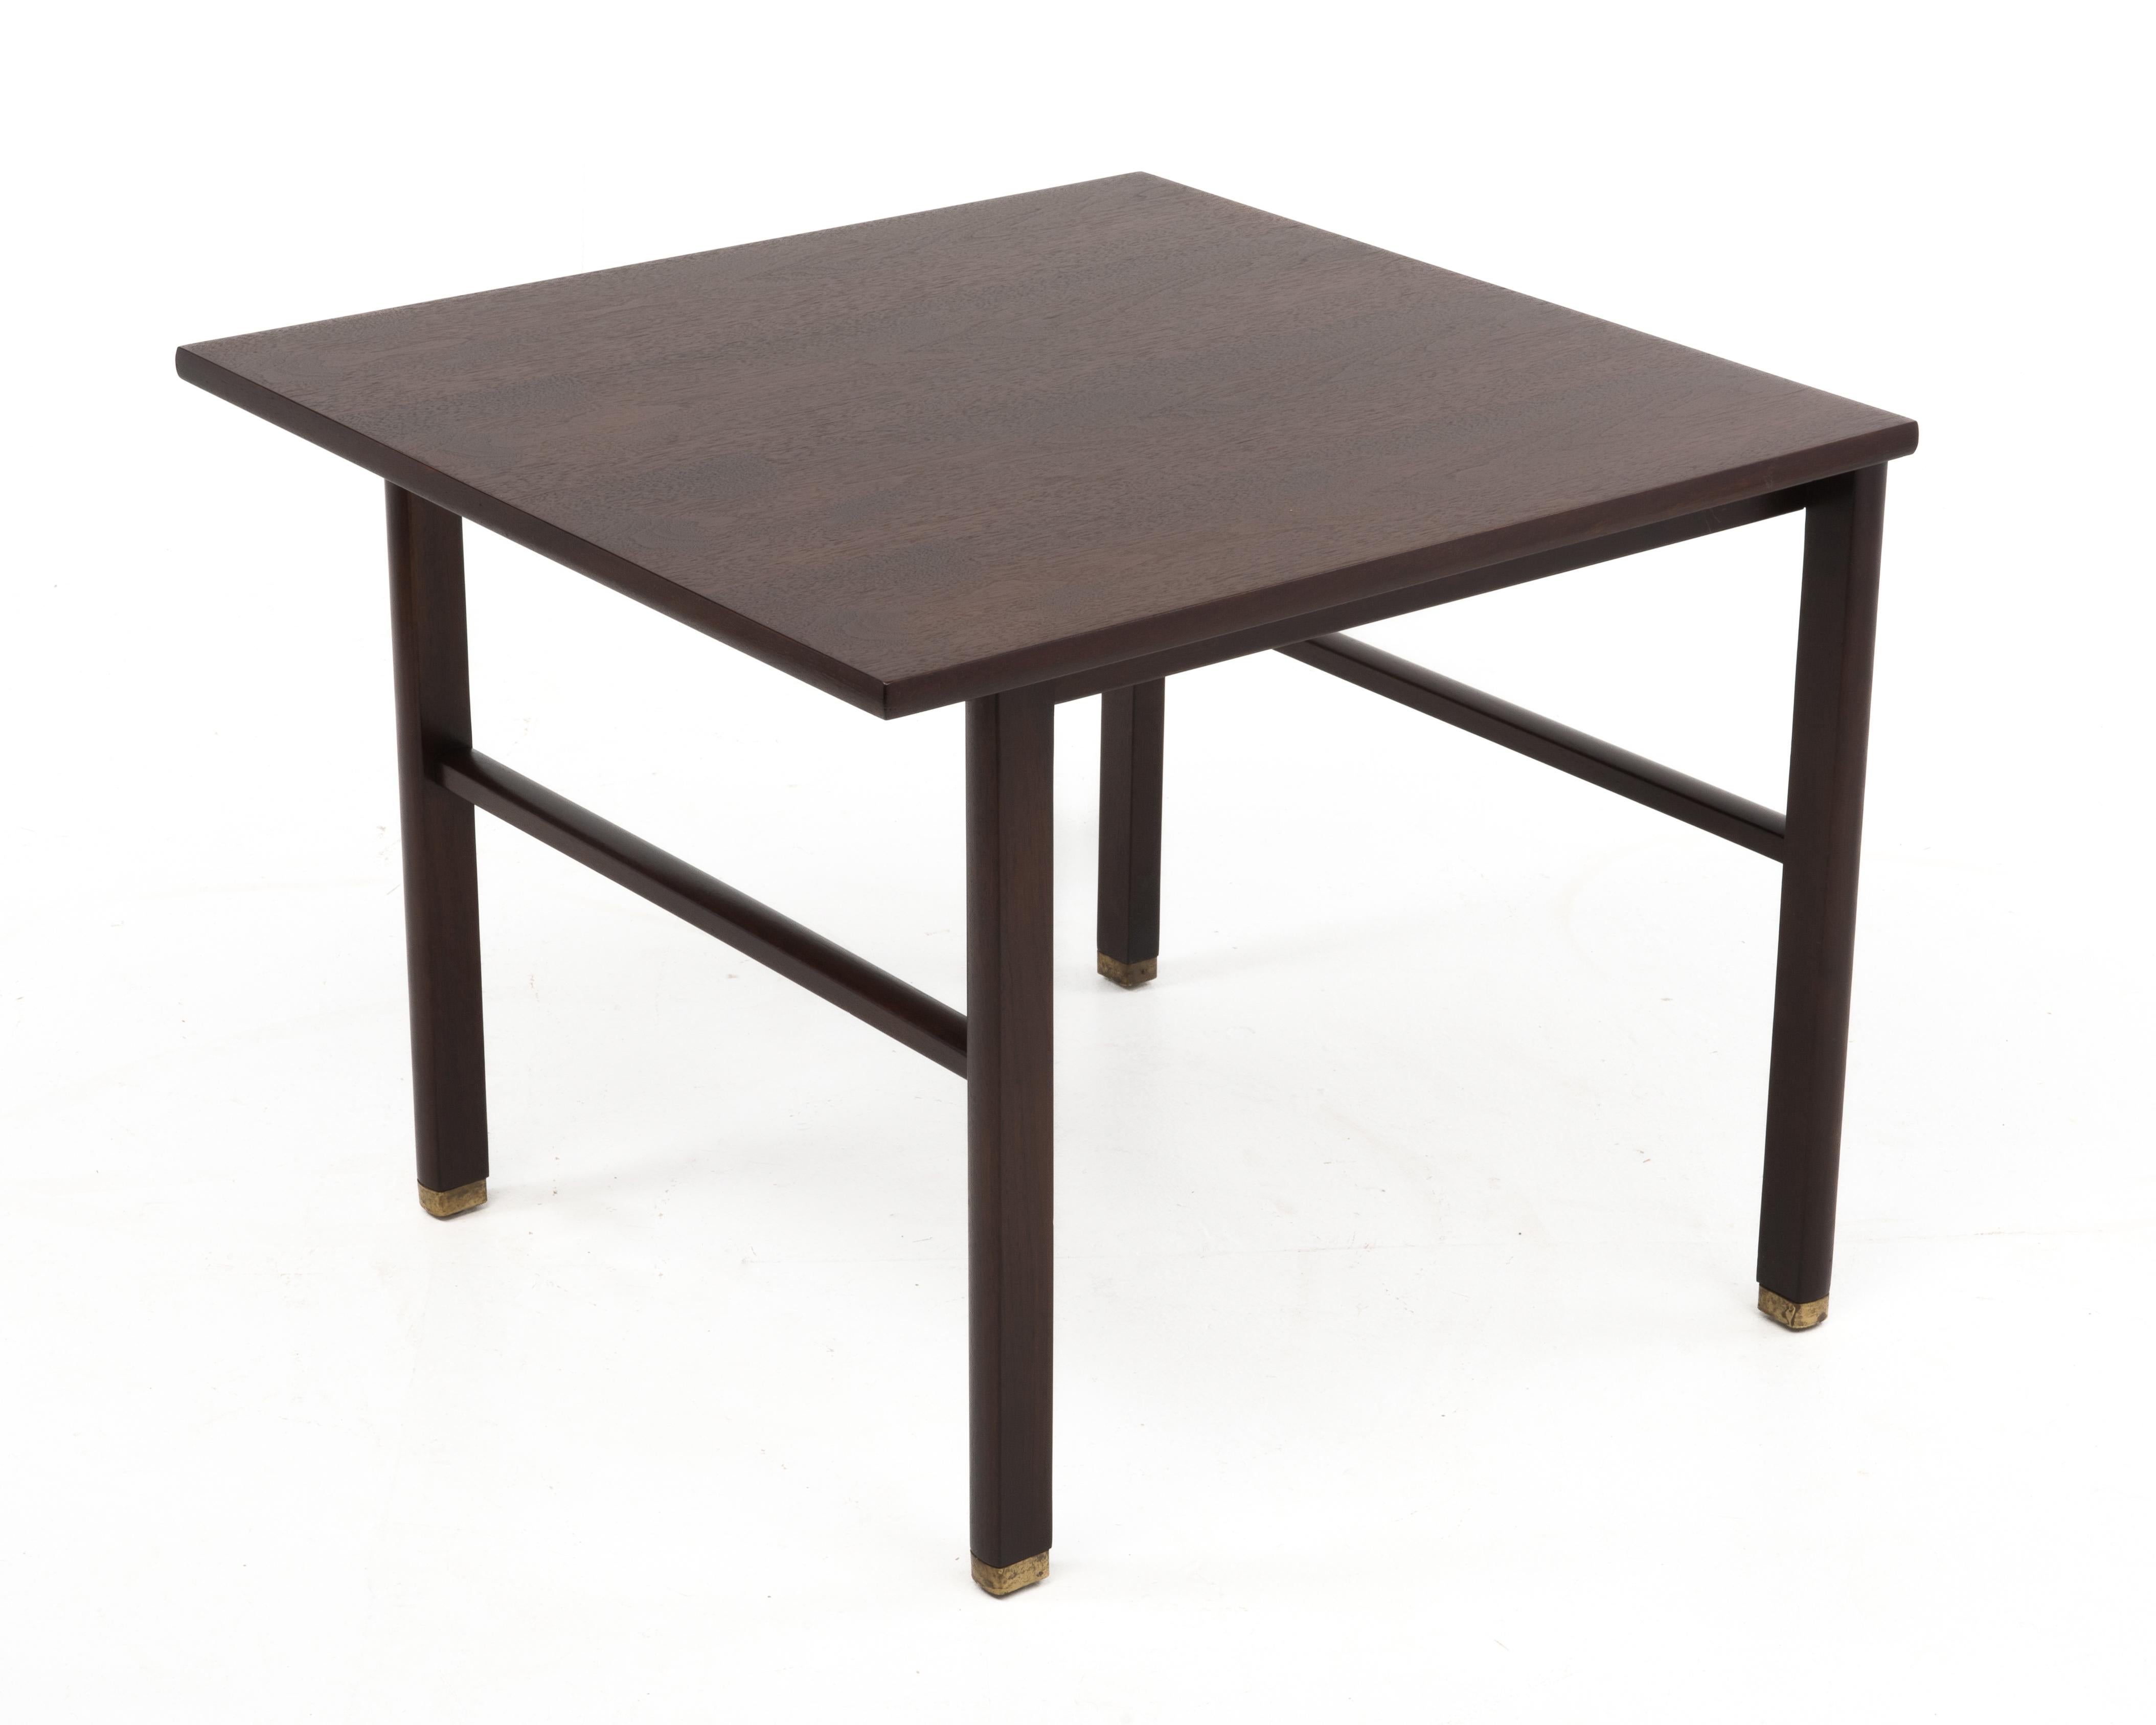 A square cantilevered walnut end table by Edward Wormley for Dunbar, c. 1960's. Features a cantilevered top and brass feet. The table retains a paper label and the original Dunbar brass tag.